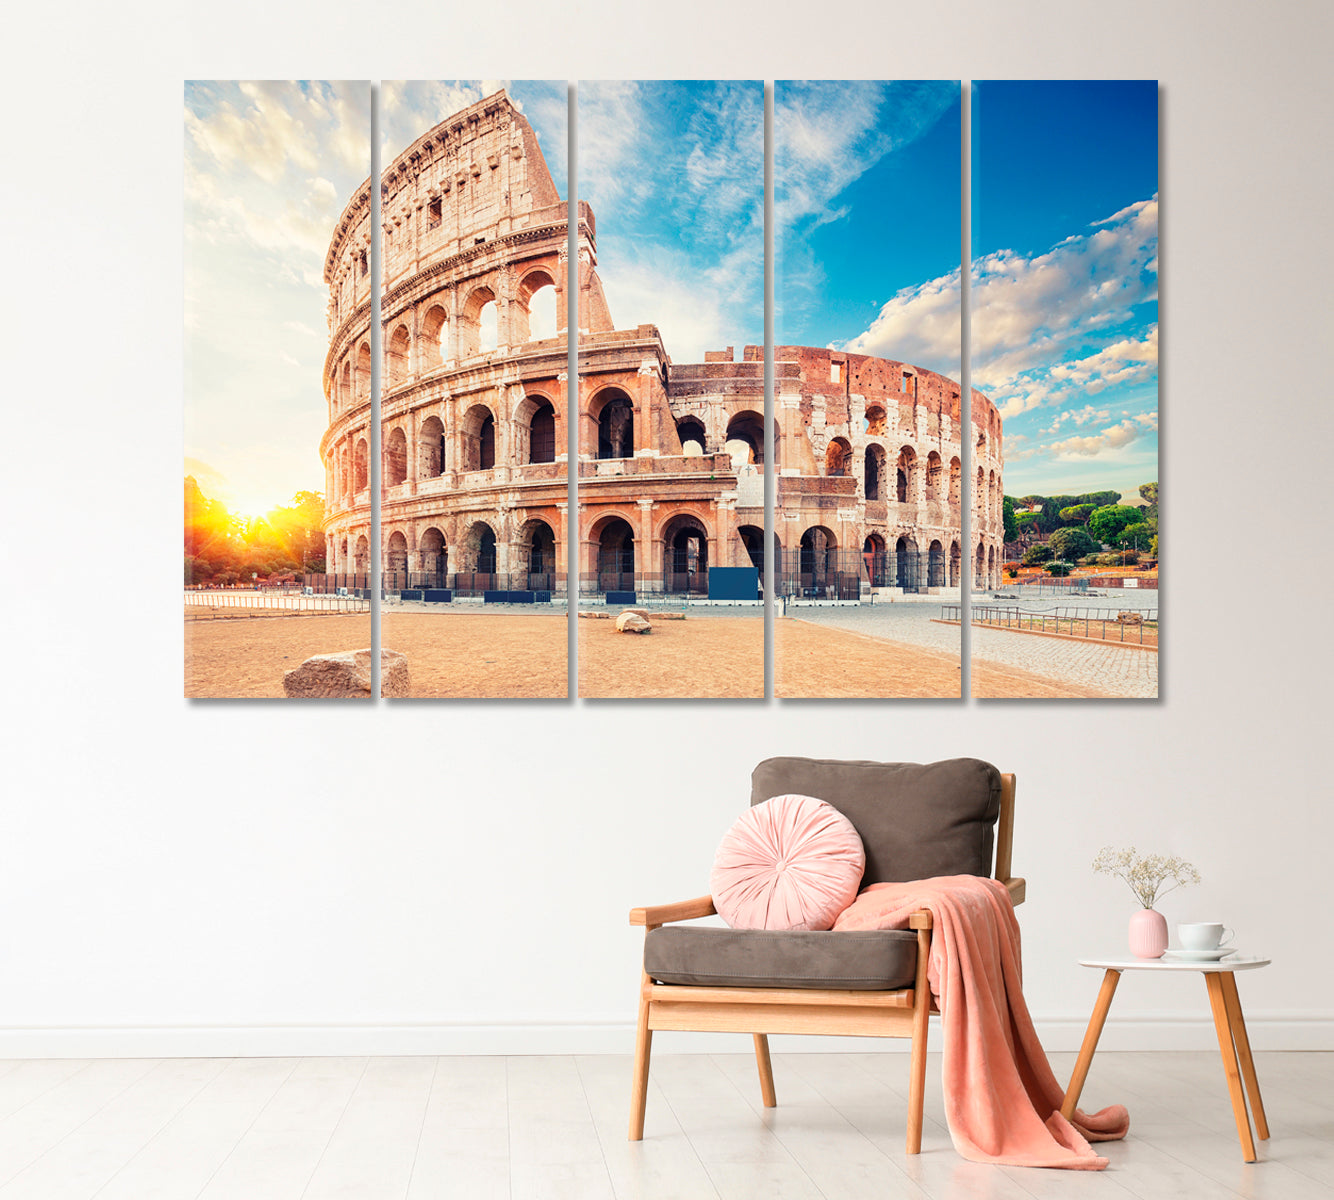 Colosseum or Flavian Amphitheater Rome Italy Canvas Print-Canvas Print-CetArt-1 Panel-24x16 inches-CetArt